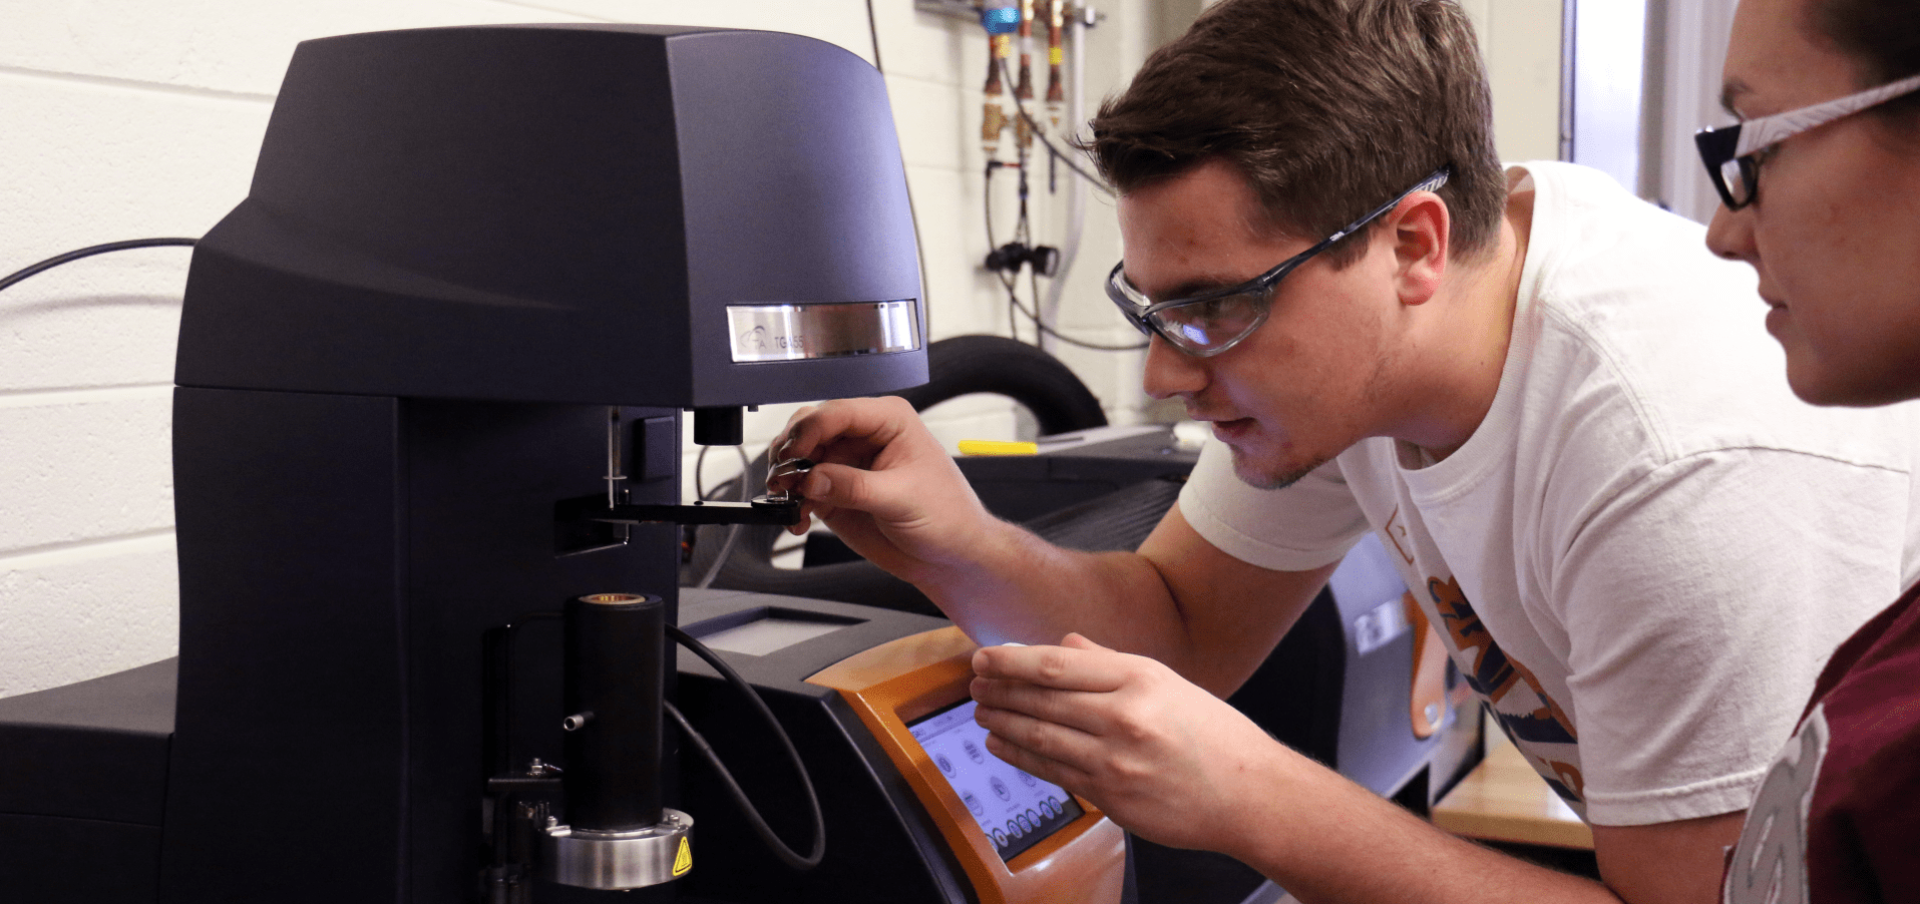 Chemical engineering students have opportunities to use industry standard equipment.